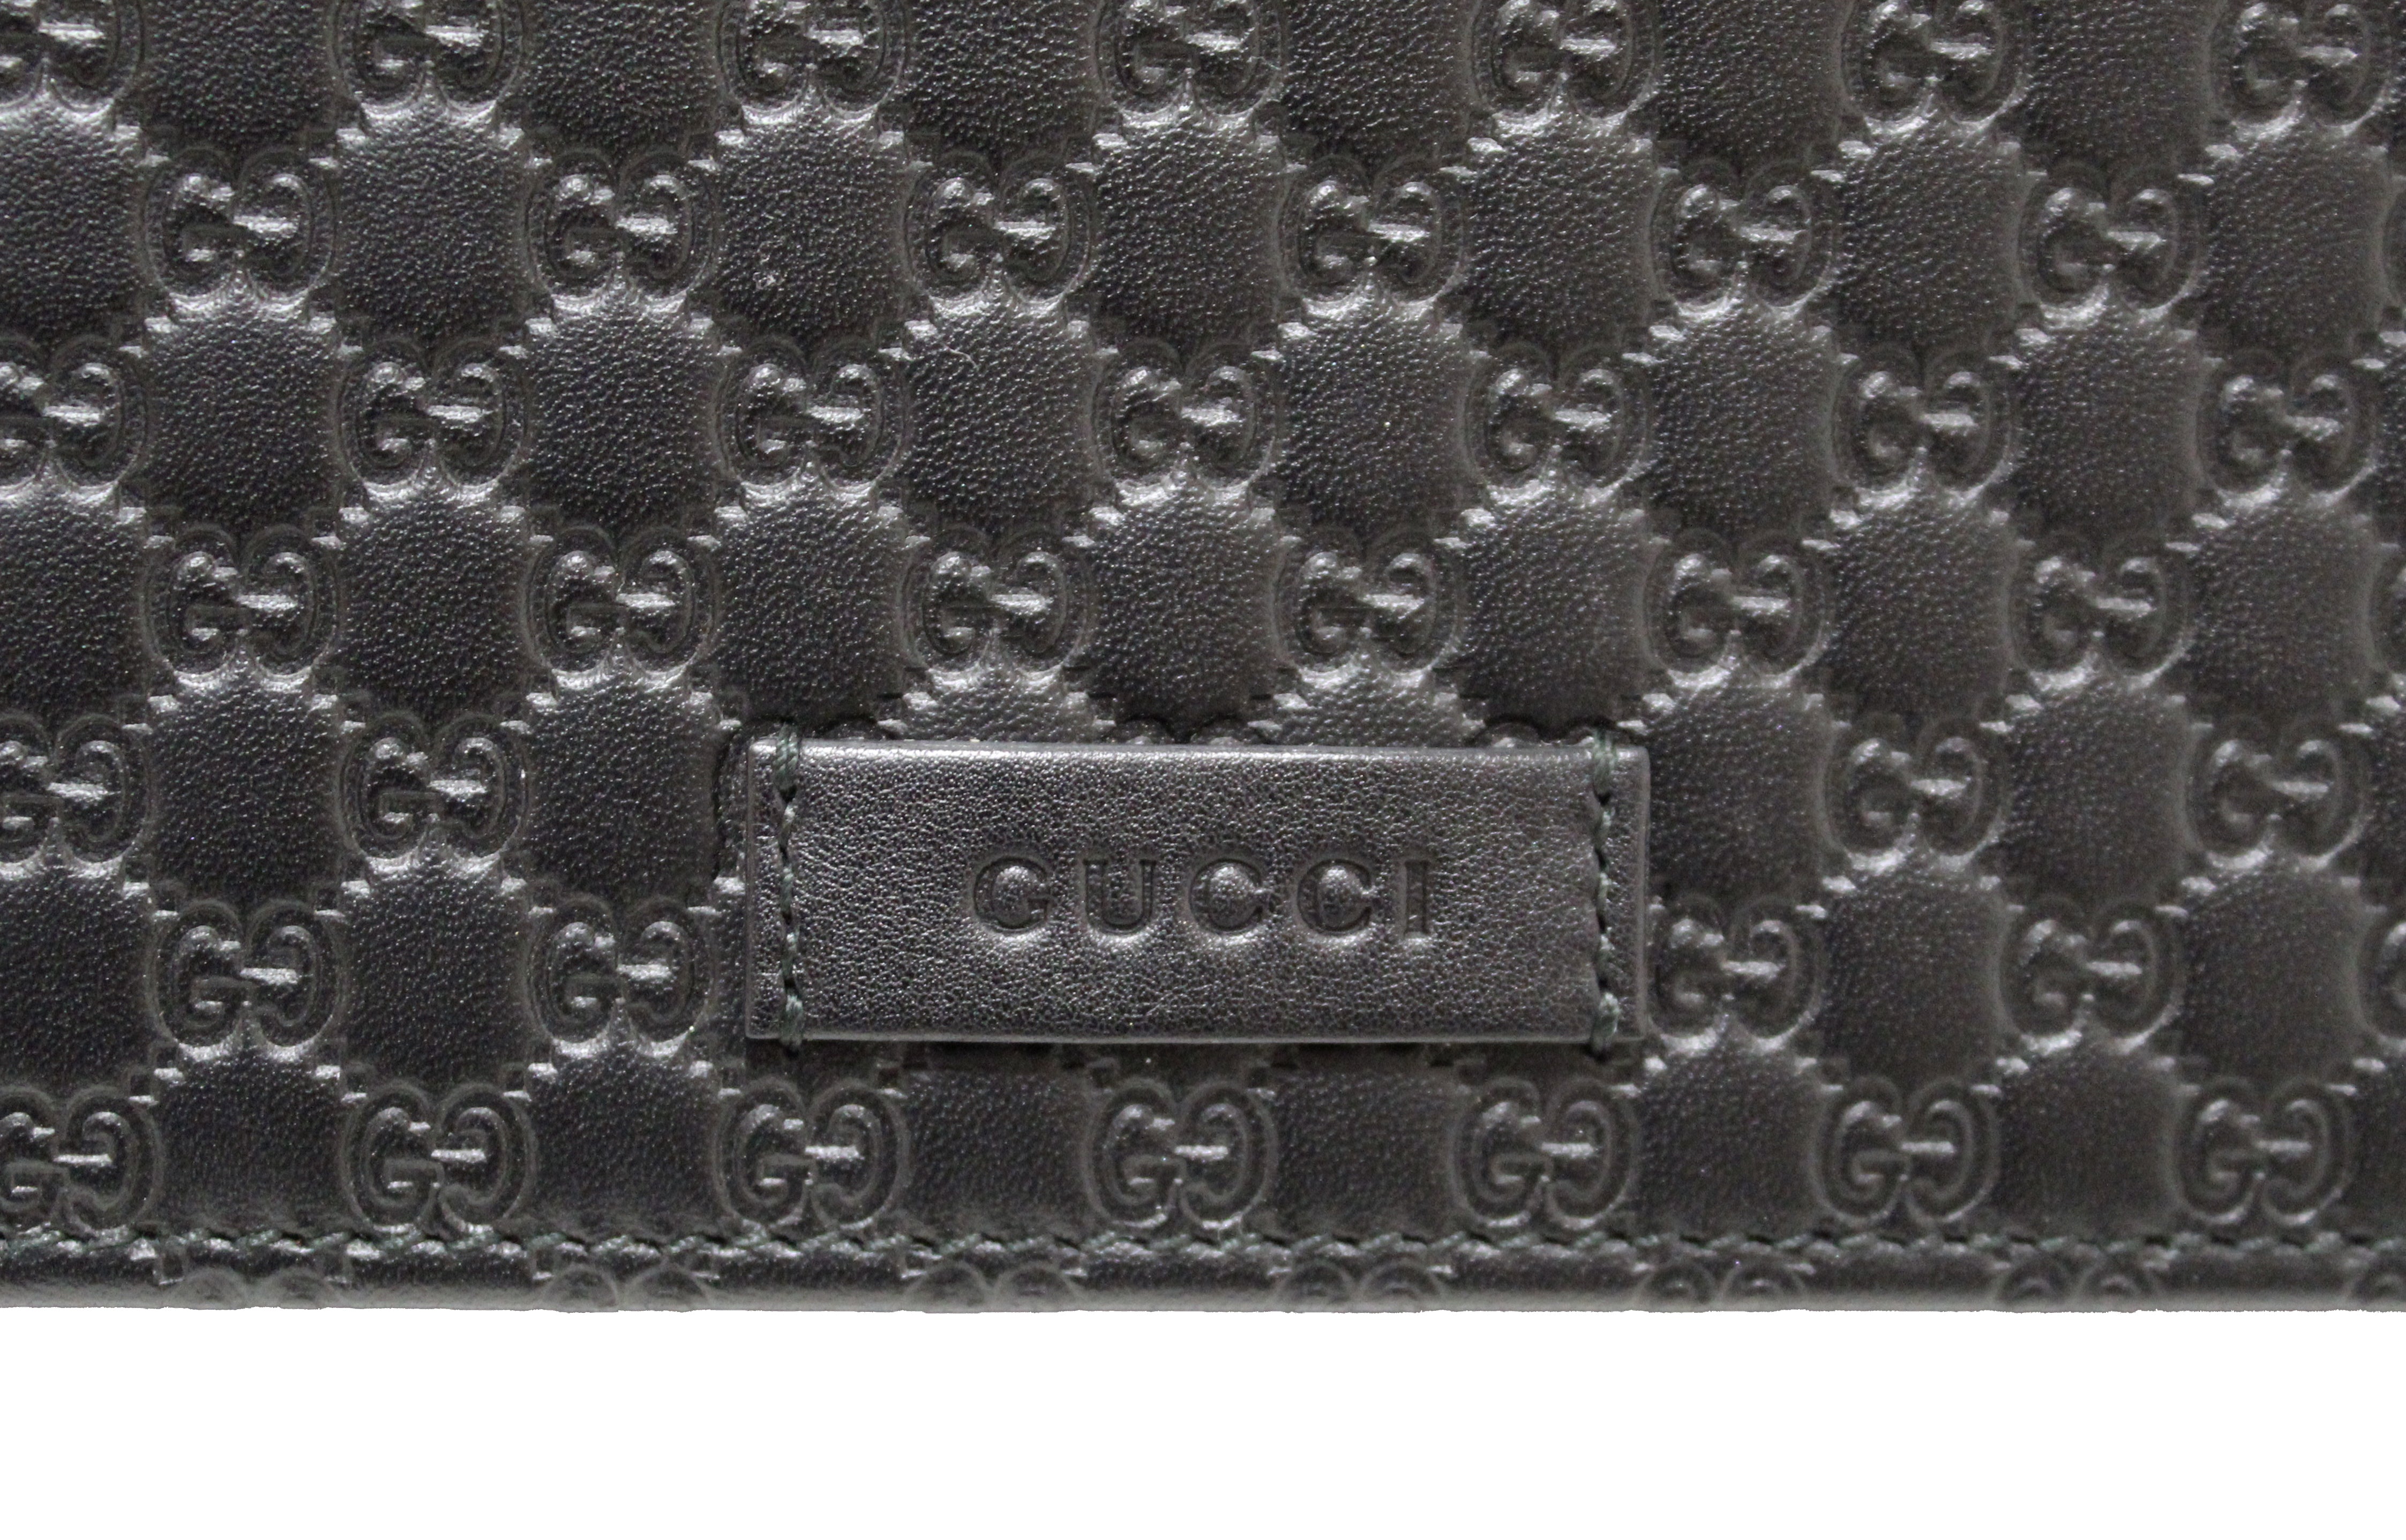 Authentic Gucci Black Microguccissima Leather Wallet With Strap